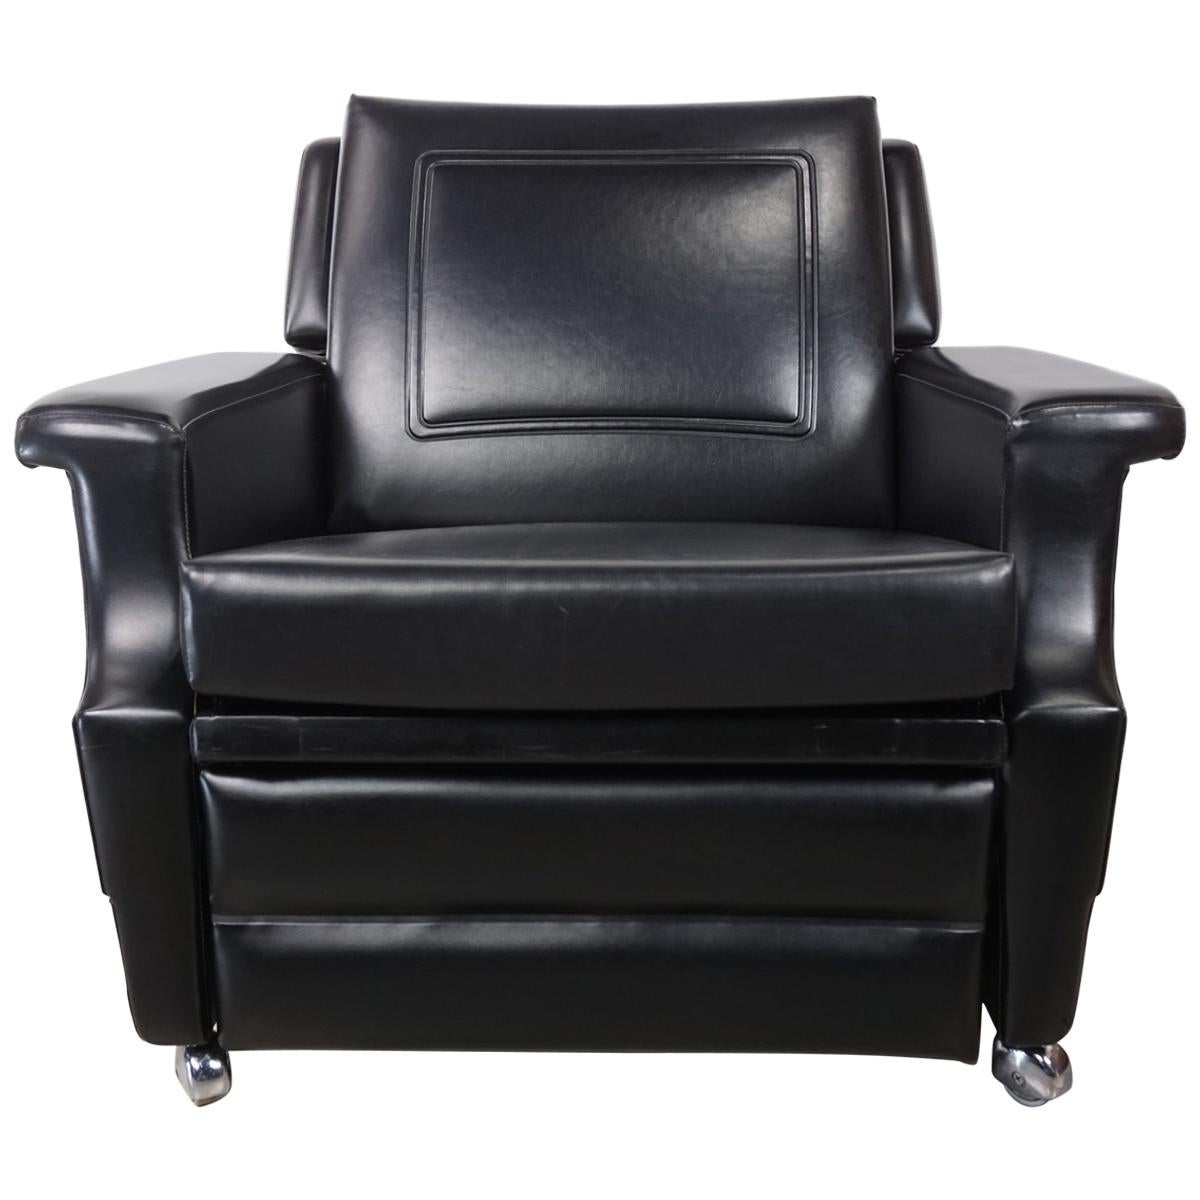 1950s French Design Recliner and Relax Black Faux Leather Armchair